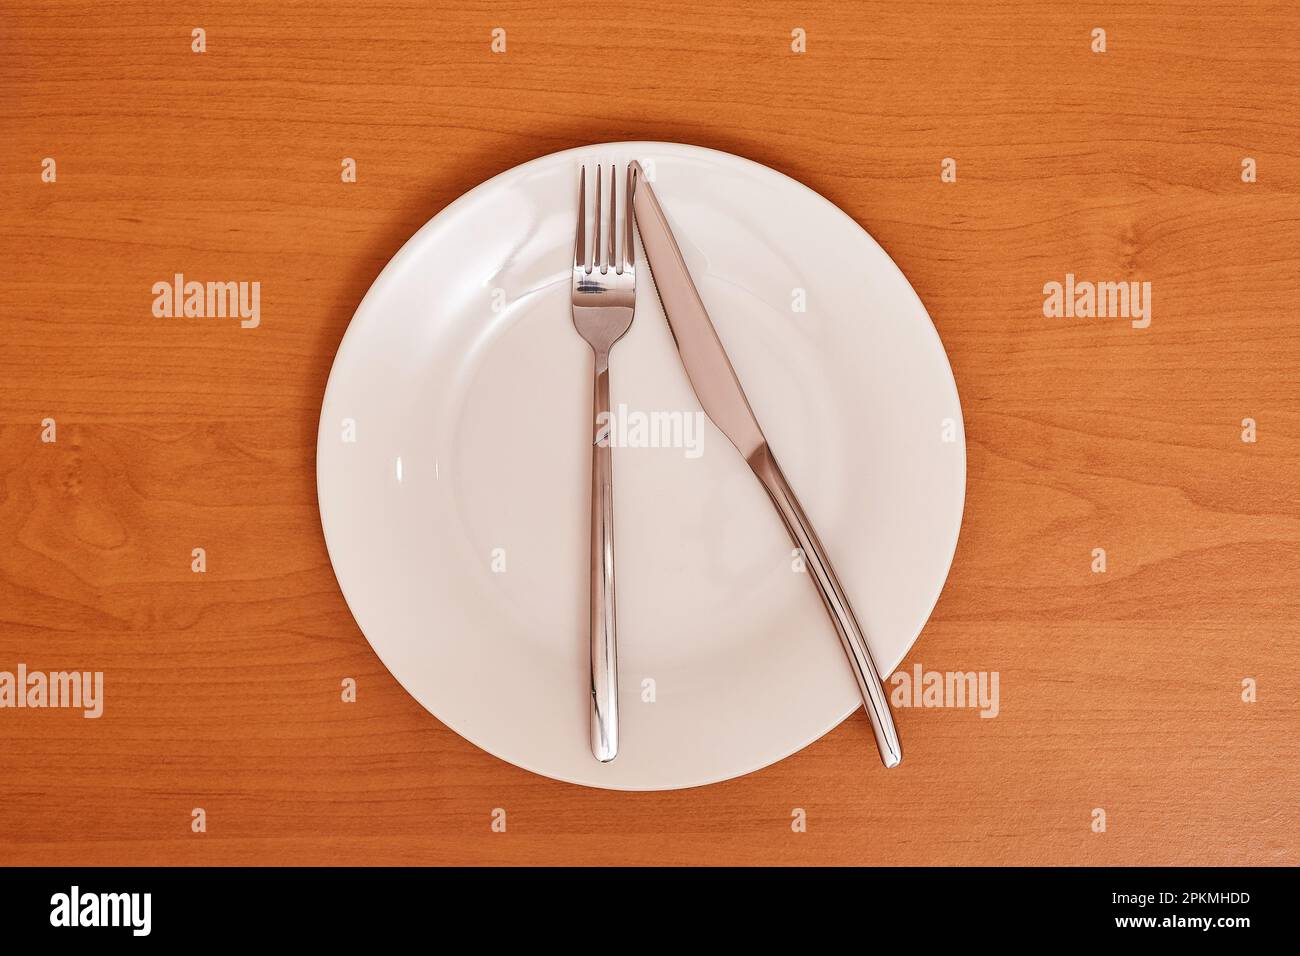 A signal 'There is little food'. Empty and clean blue plate with fork and knife on a wooden table as an example of table etiquette Stock Photo